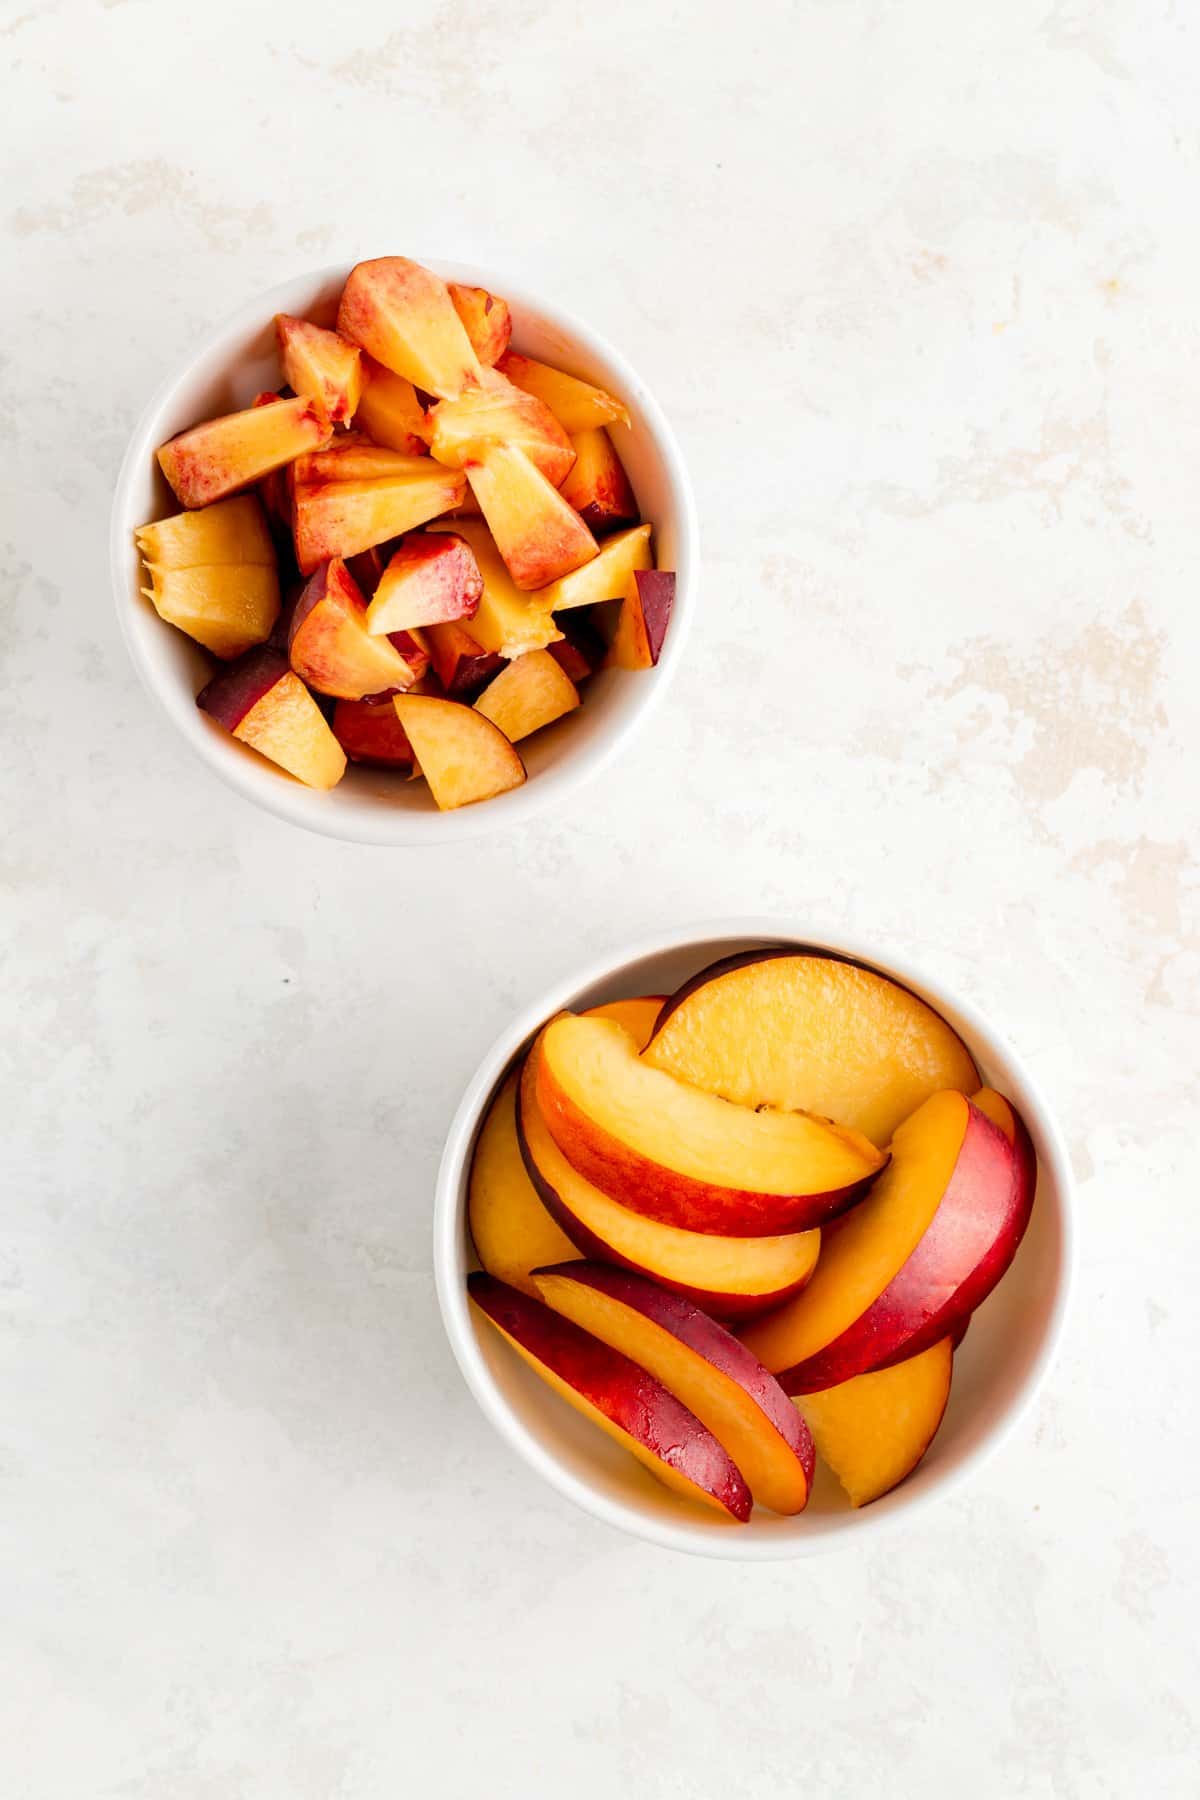 a bowl of diced peaches and a bowl of sliced peaches on a white background.